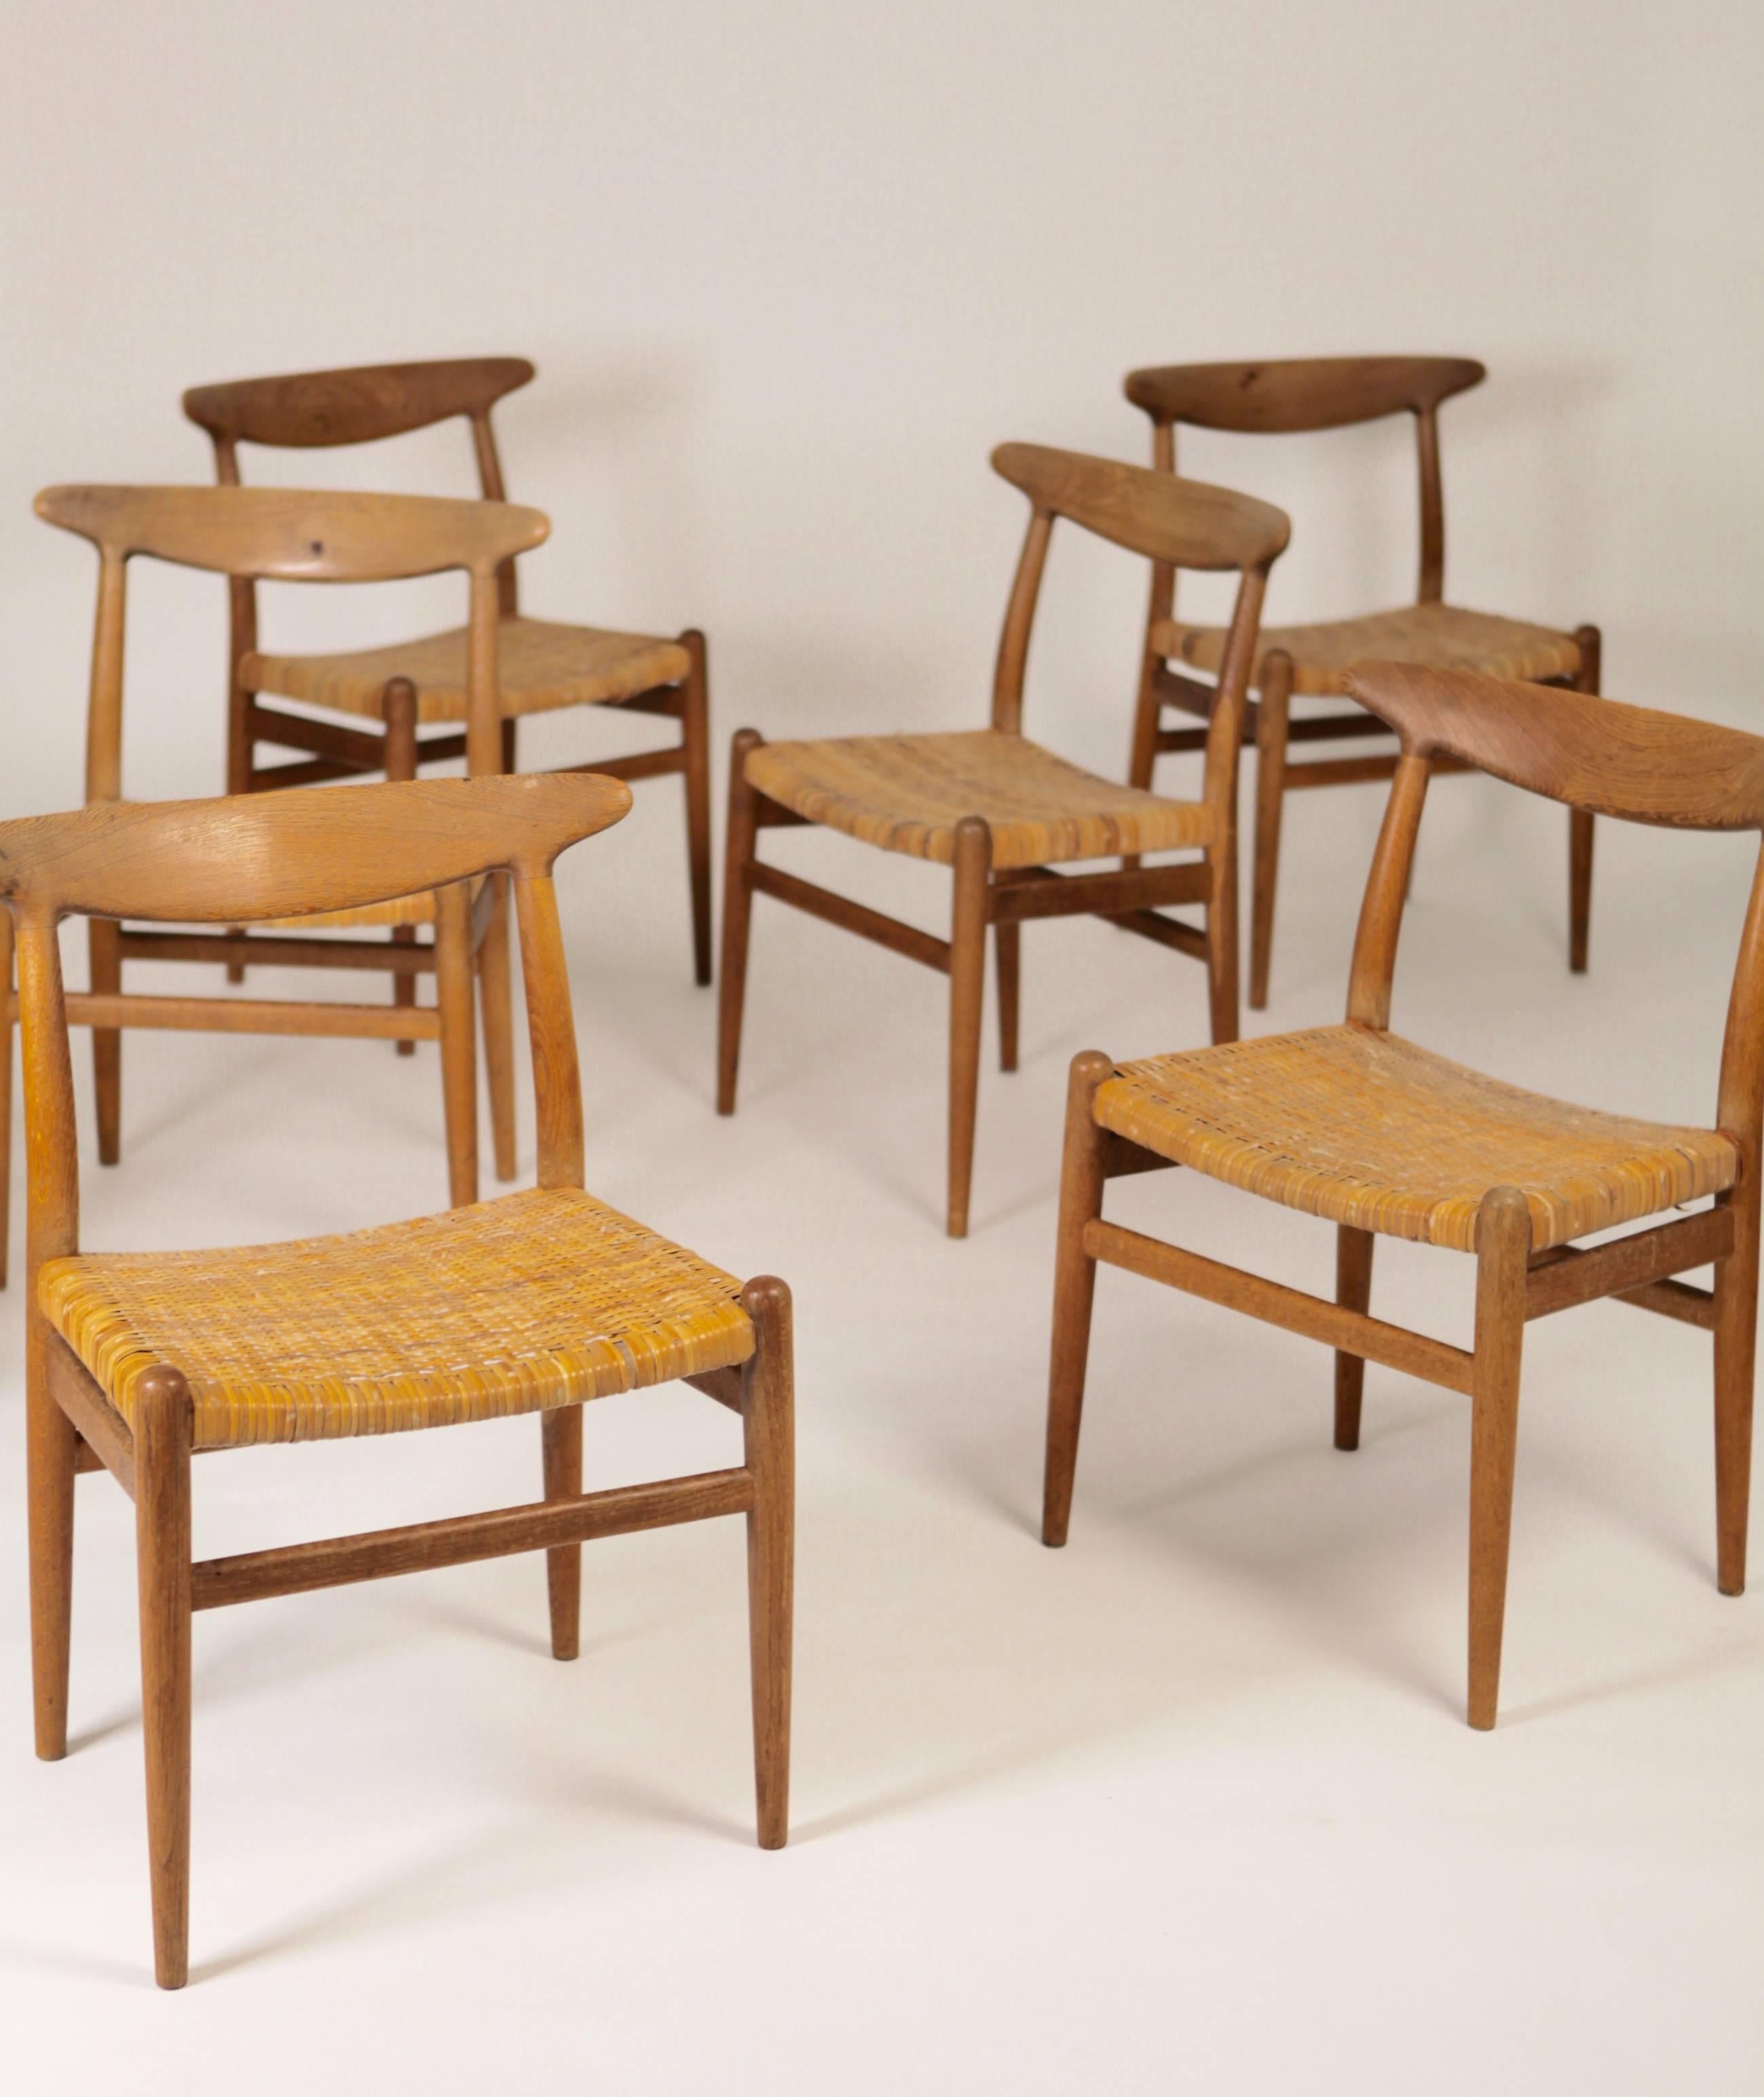 A rare set of six dining chairs in oak and cane, model W2,
manufactured by C.M. Madsen in the 1950s, all signed
designed by Hans Wegner.